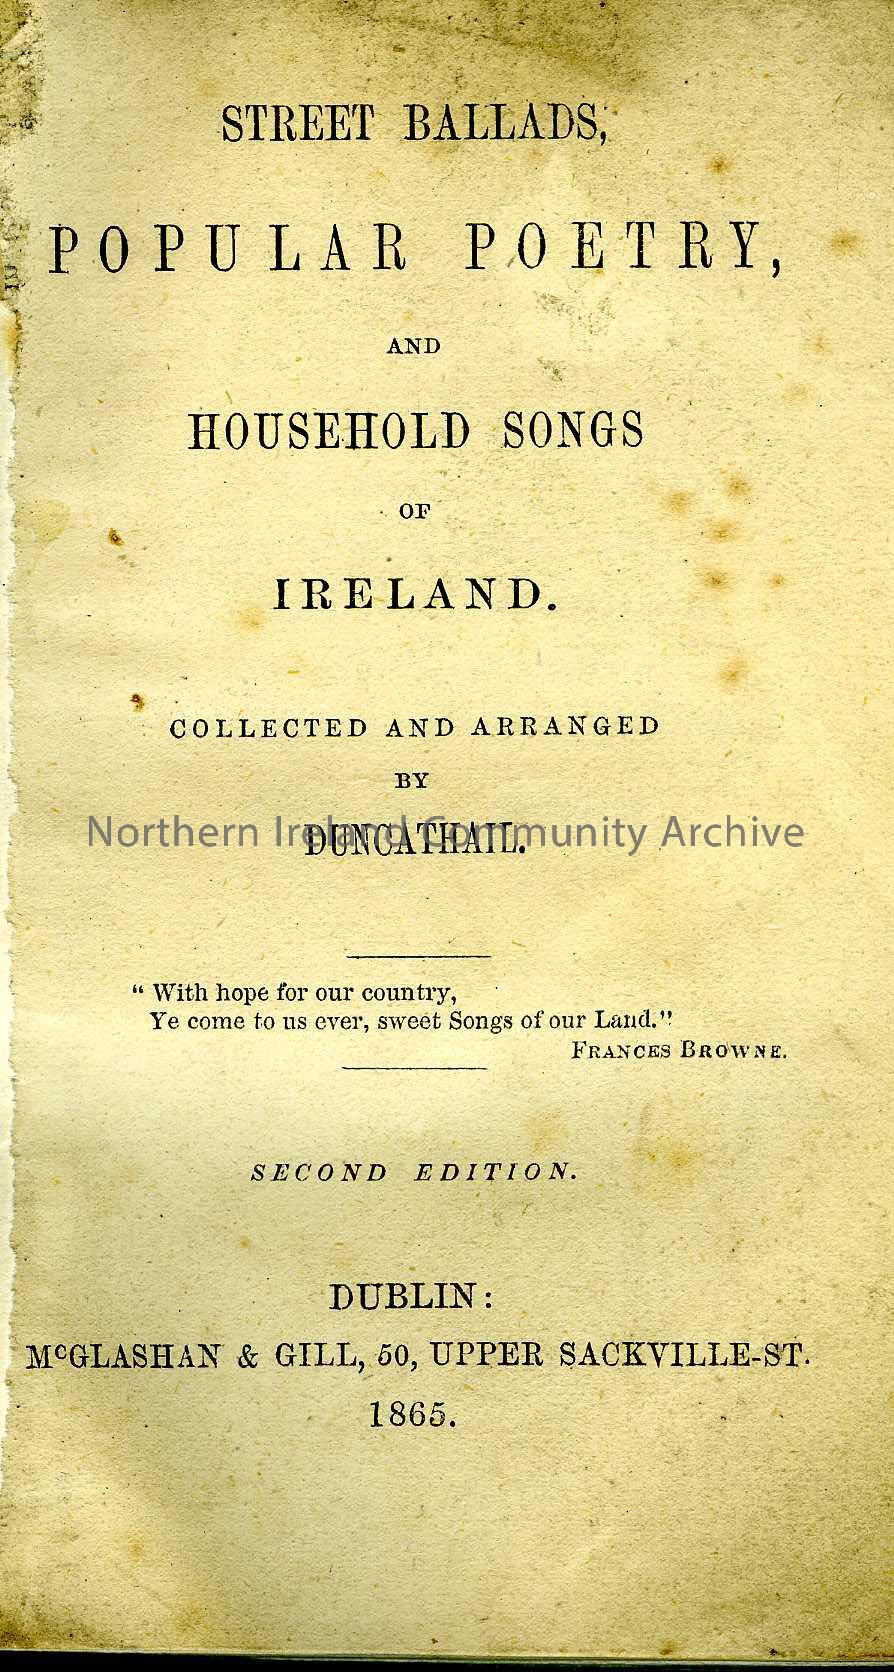 Street Ballads, Popular Poetry and Household Songs of Ireland – 390B